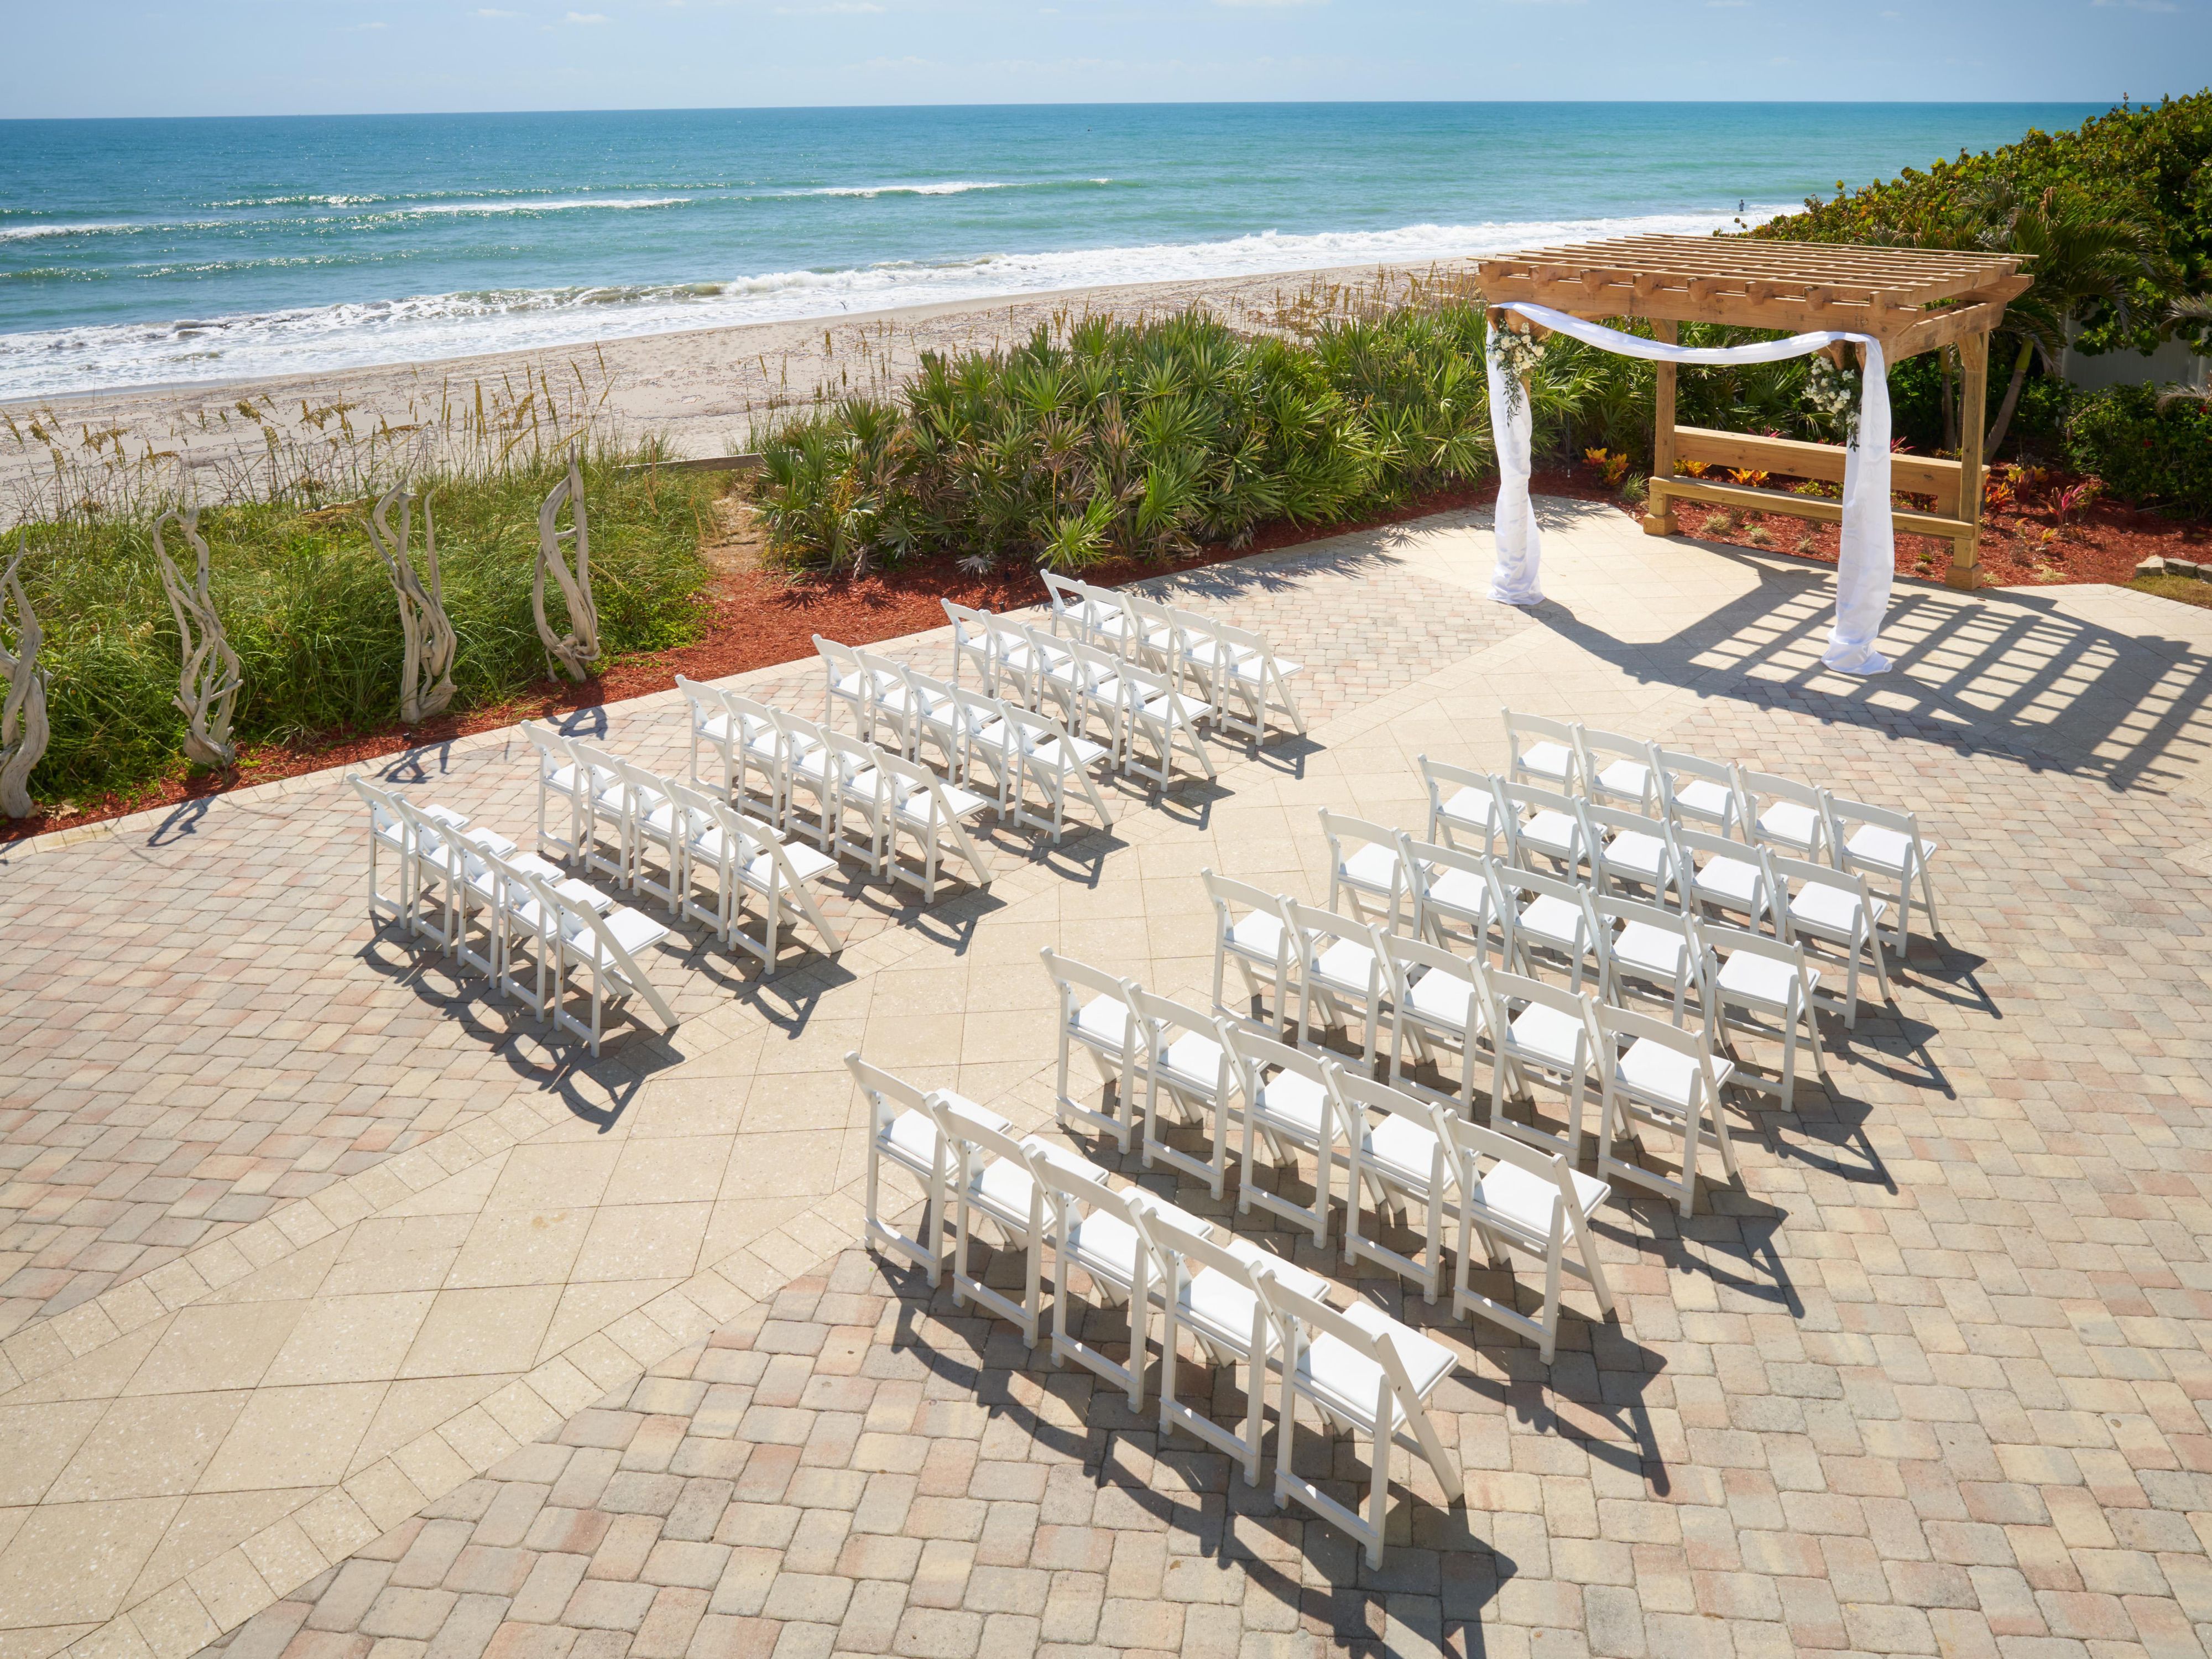 Looking for the ideal wedding venue on the beach? Celebrate your special day at our beautiful oceanfront hotel. Our experienced team will help you plan every detail to perfection. We offer a variety of indoor and outdoor spaces, including our 4,420 square feet grand ballroom, as well as wedding packages to make the entire planning process seamless.